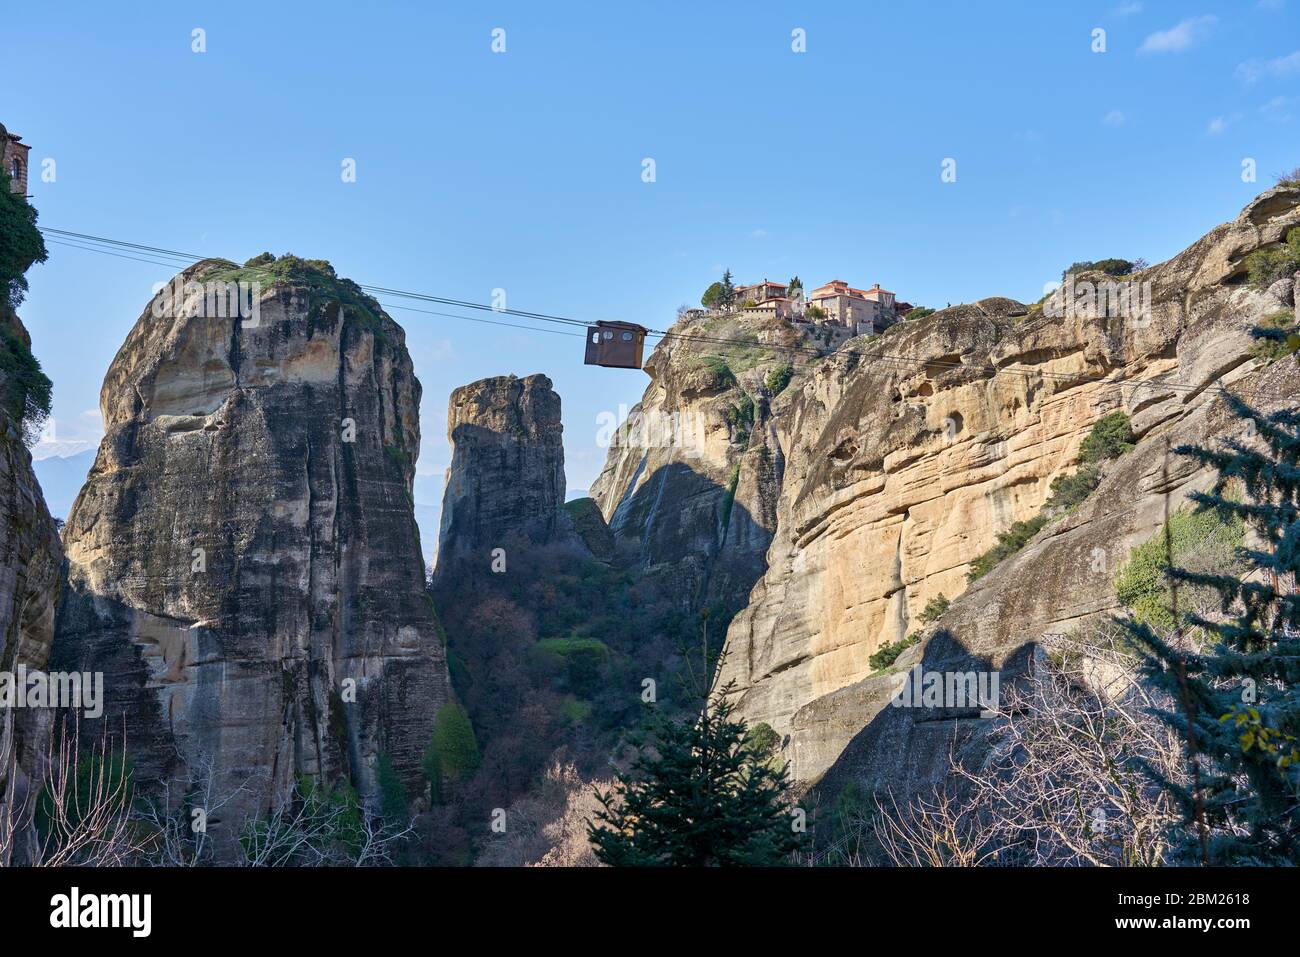 Cable car for transportation at Eastern Orthodox monasteries of Meteora, Kalabaka, Greece Stock Photo